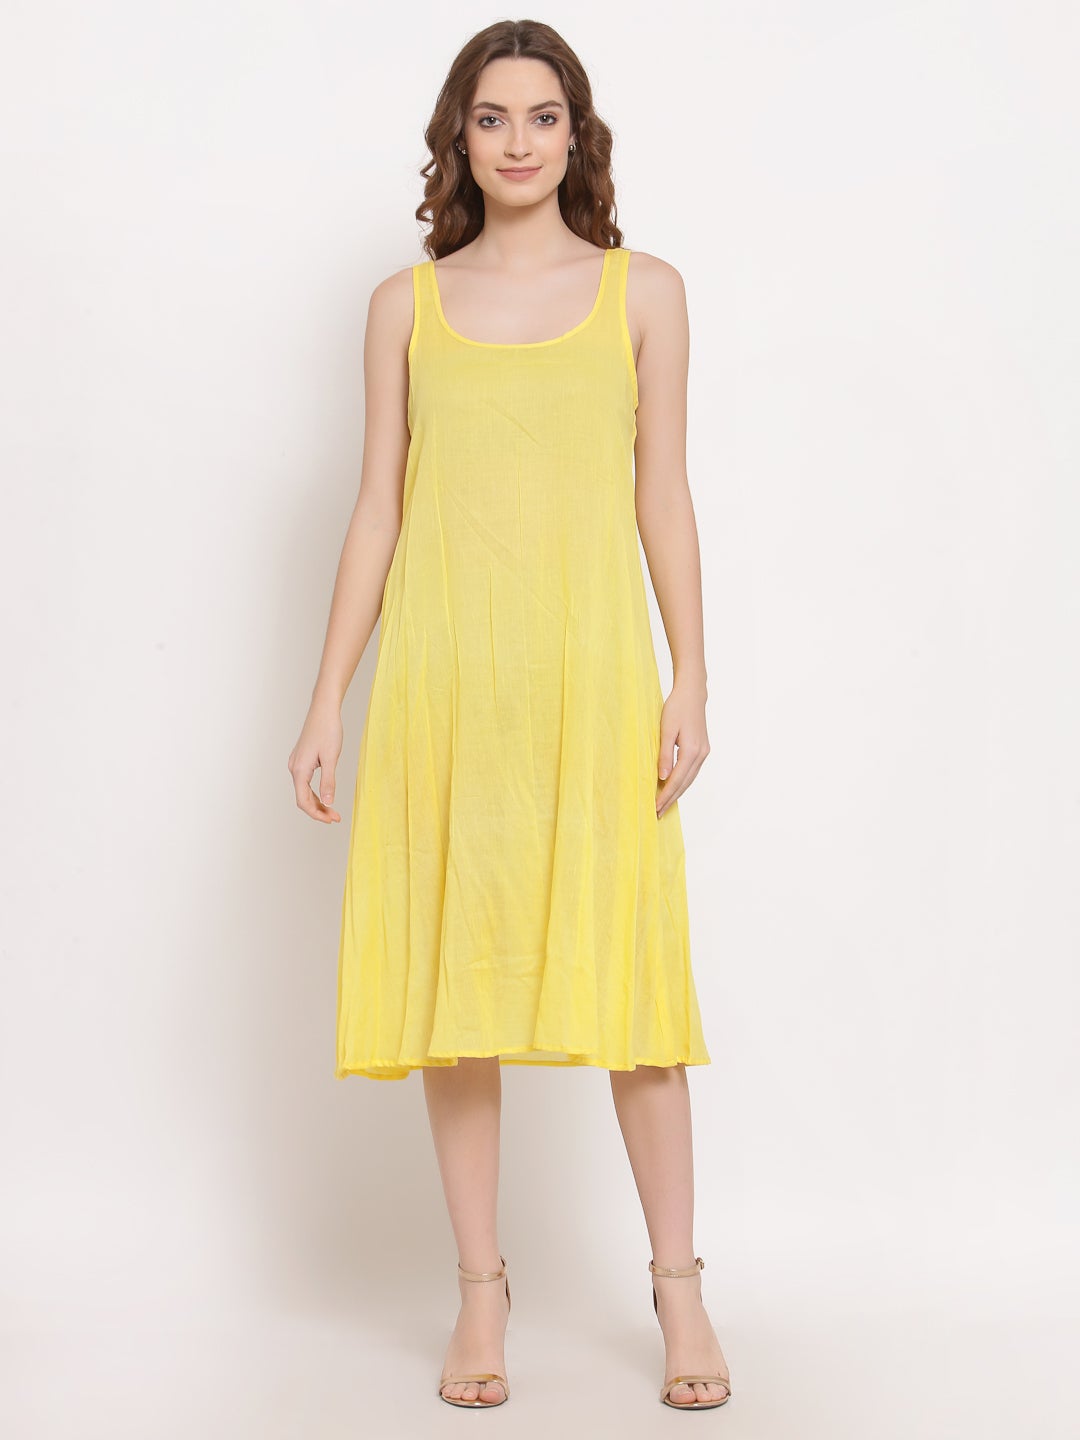 Terquois Mirror Work Two Layered Casual Dress Dresses TERQUOIS   